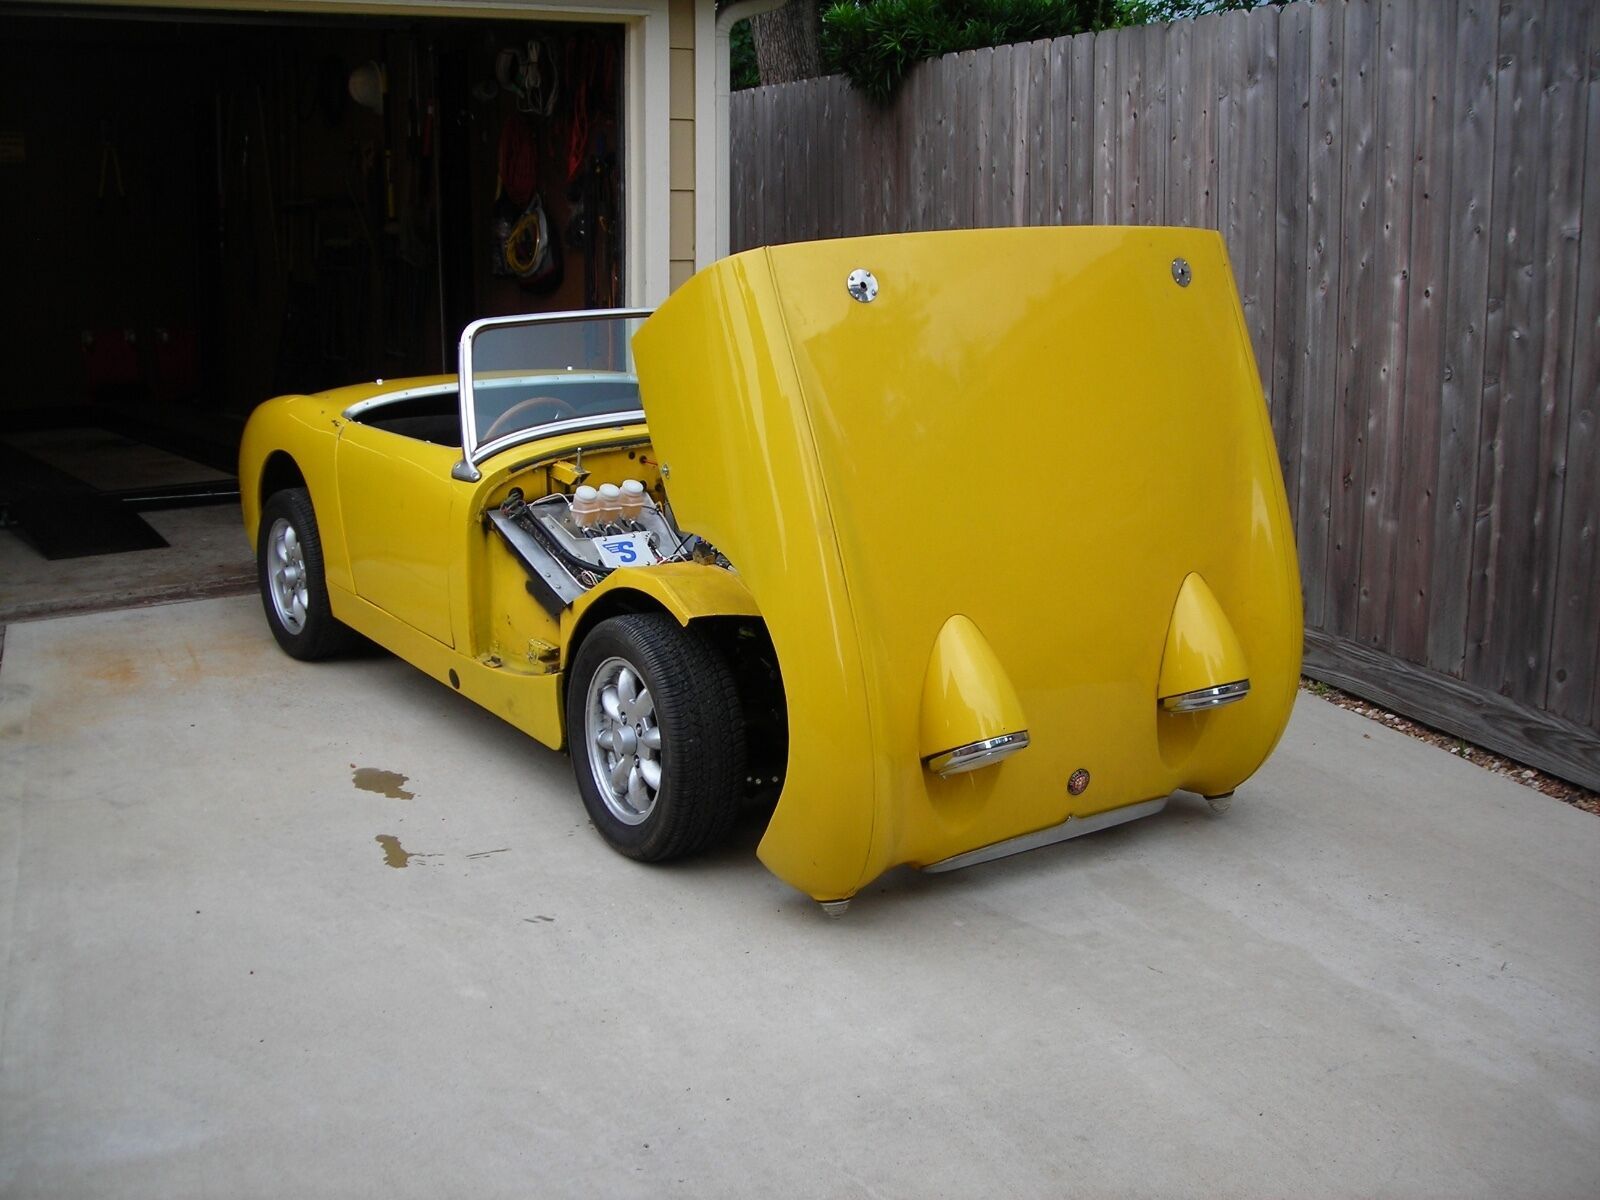 Austin Healey Bugeye Sprite with modified front flip hood